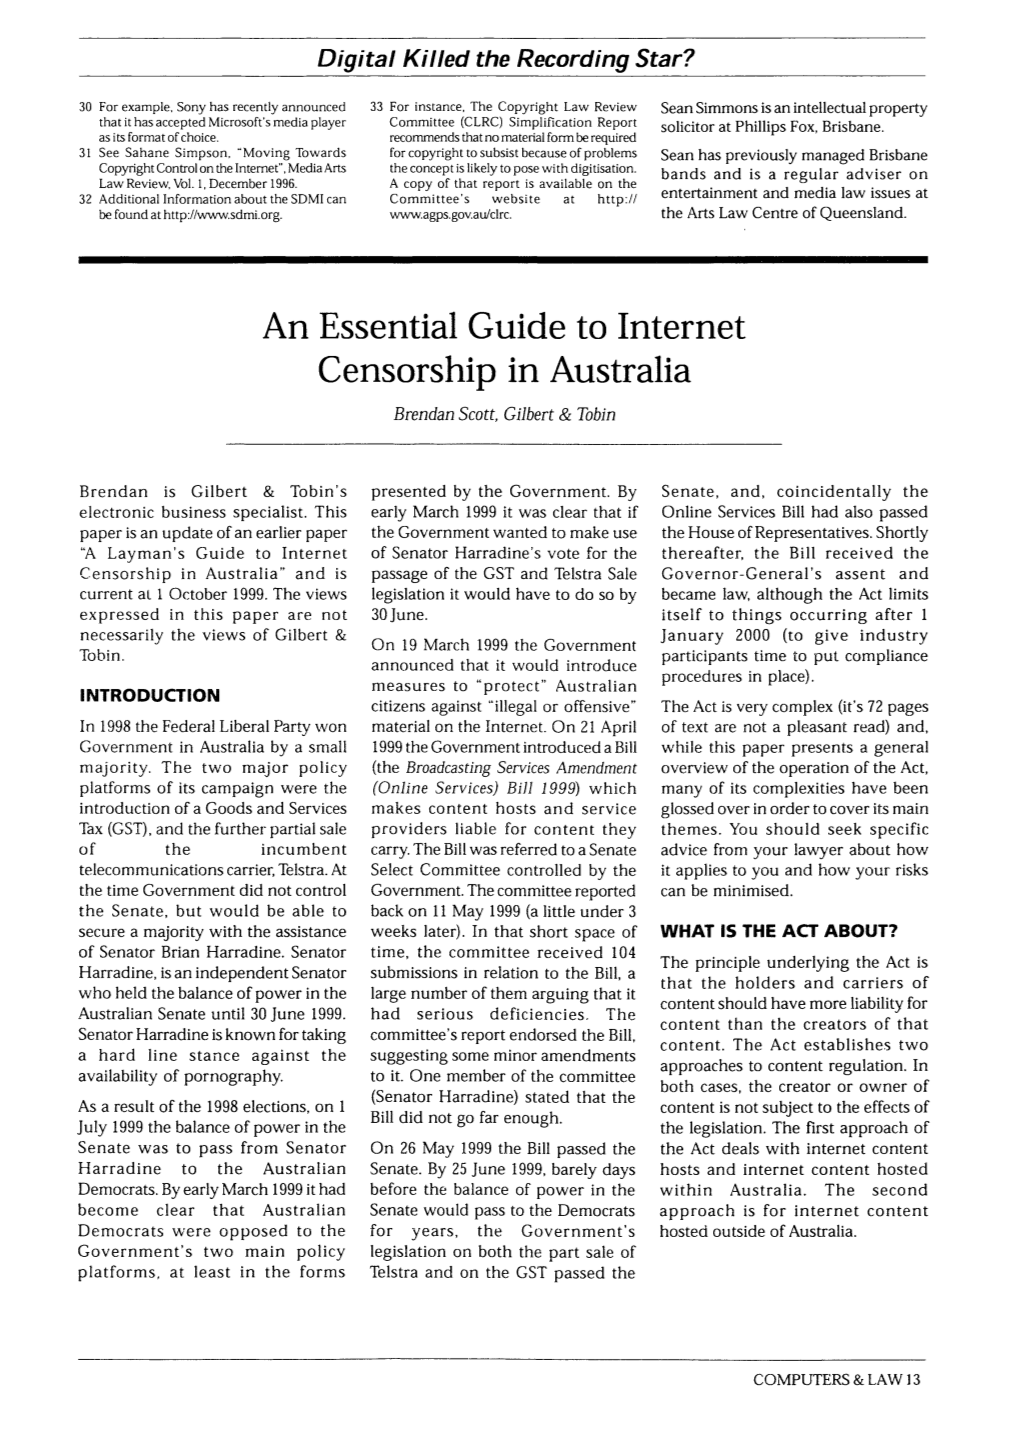 An Essential Guide to Internet Censorship in Australia